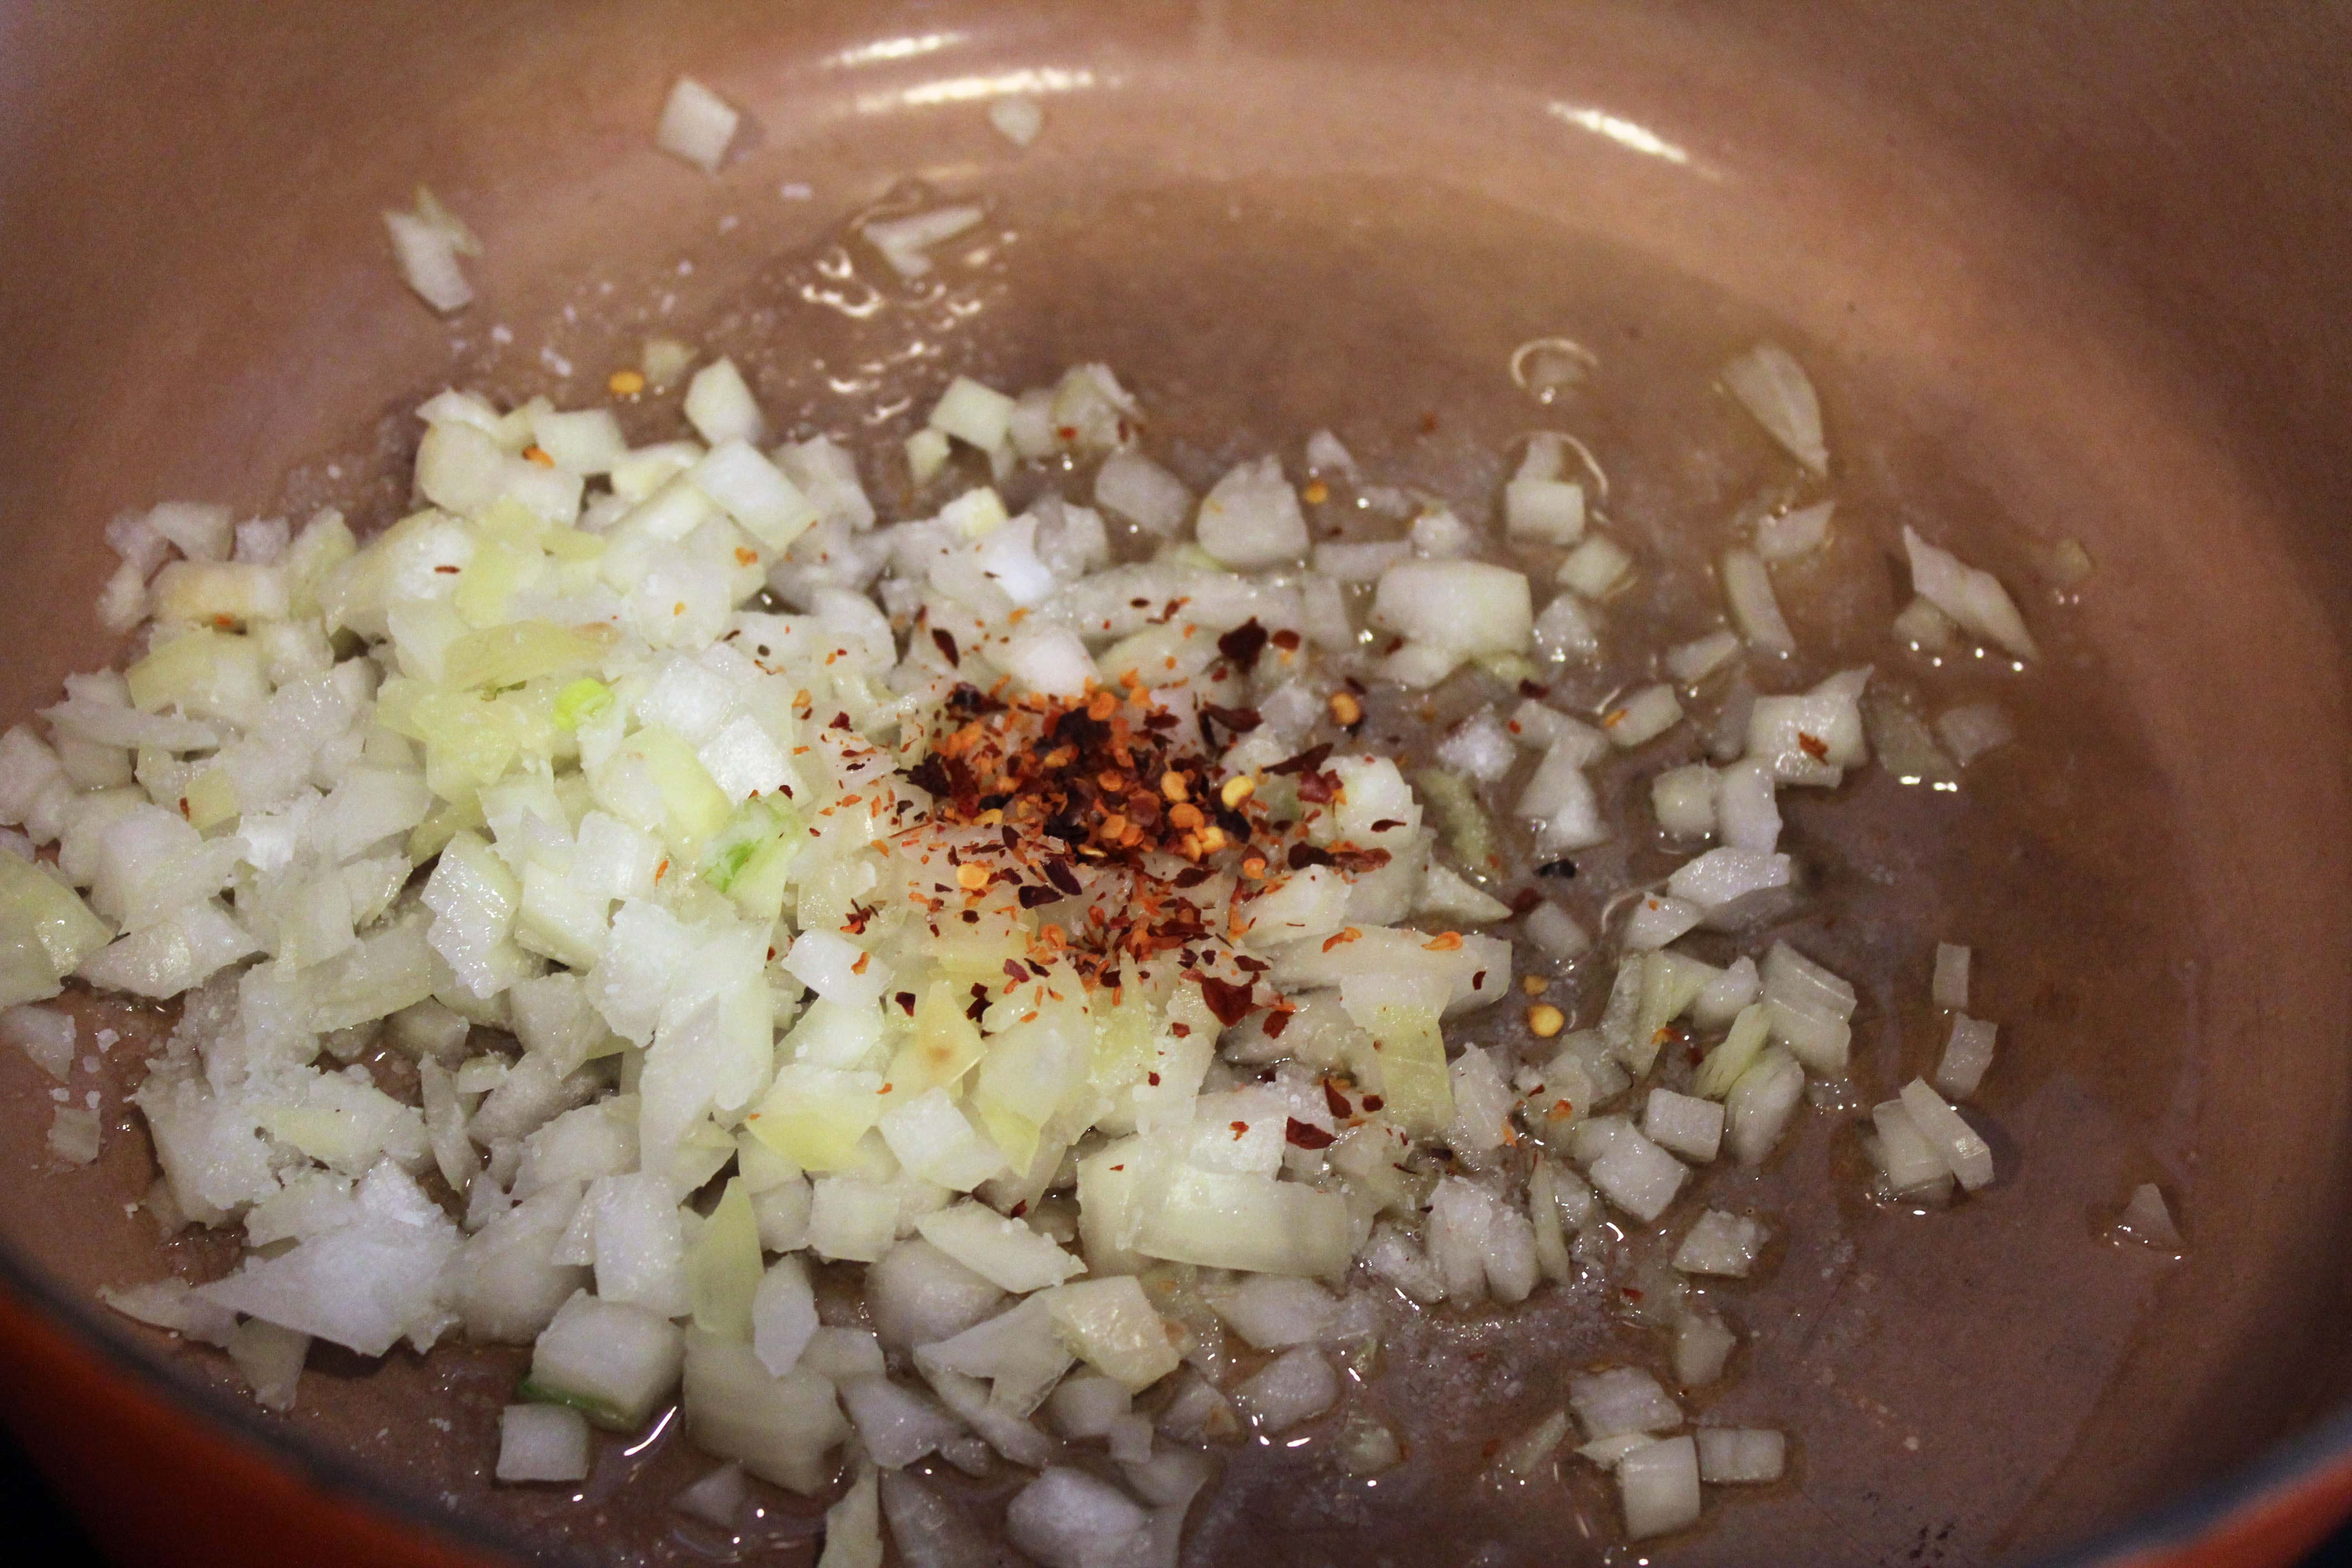 Start onion and crushed red pepper